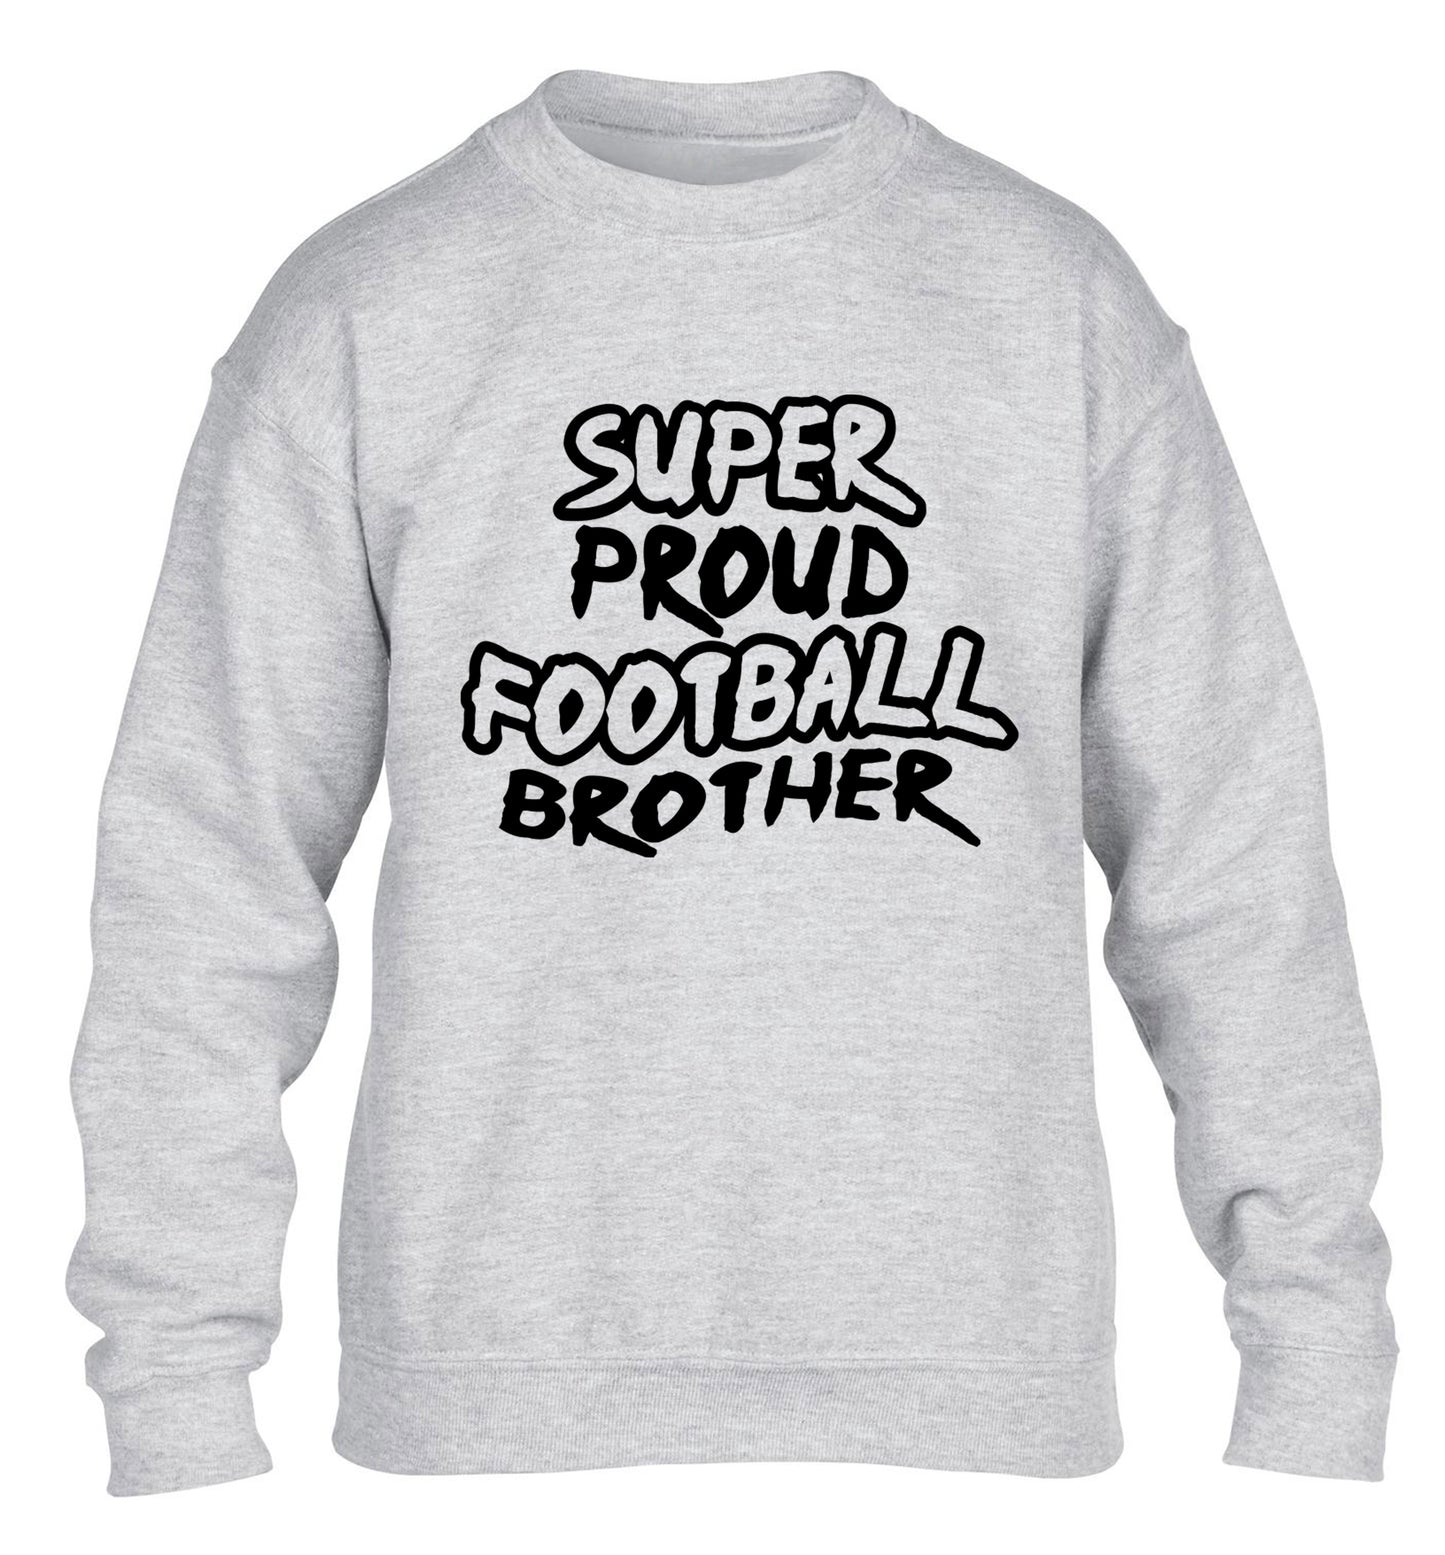 Super proud football brother children's grey sweater 12-14 Years